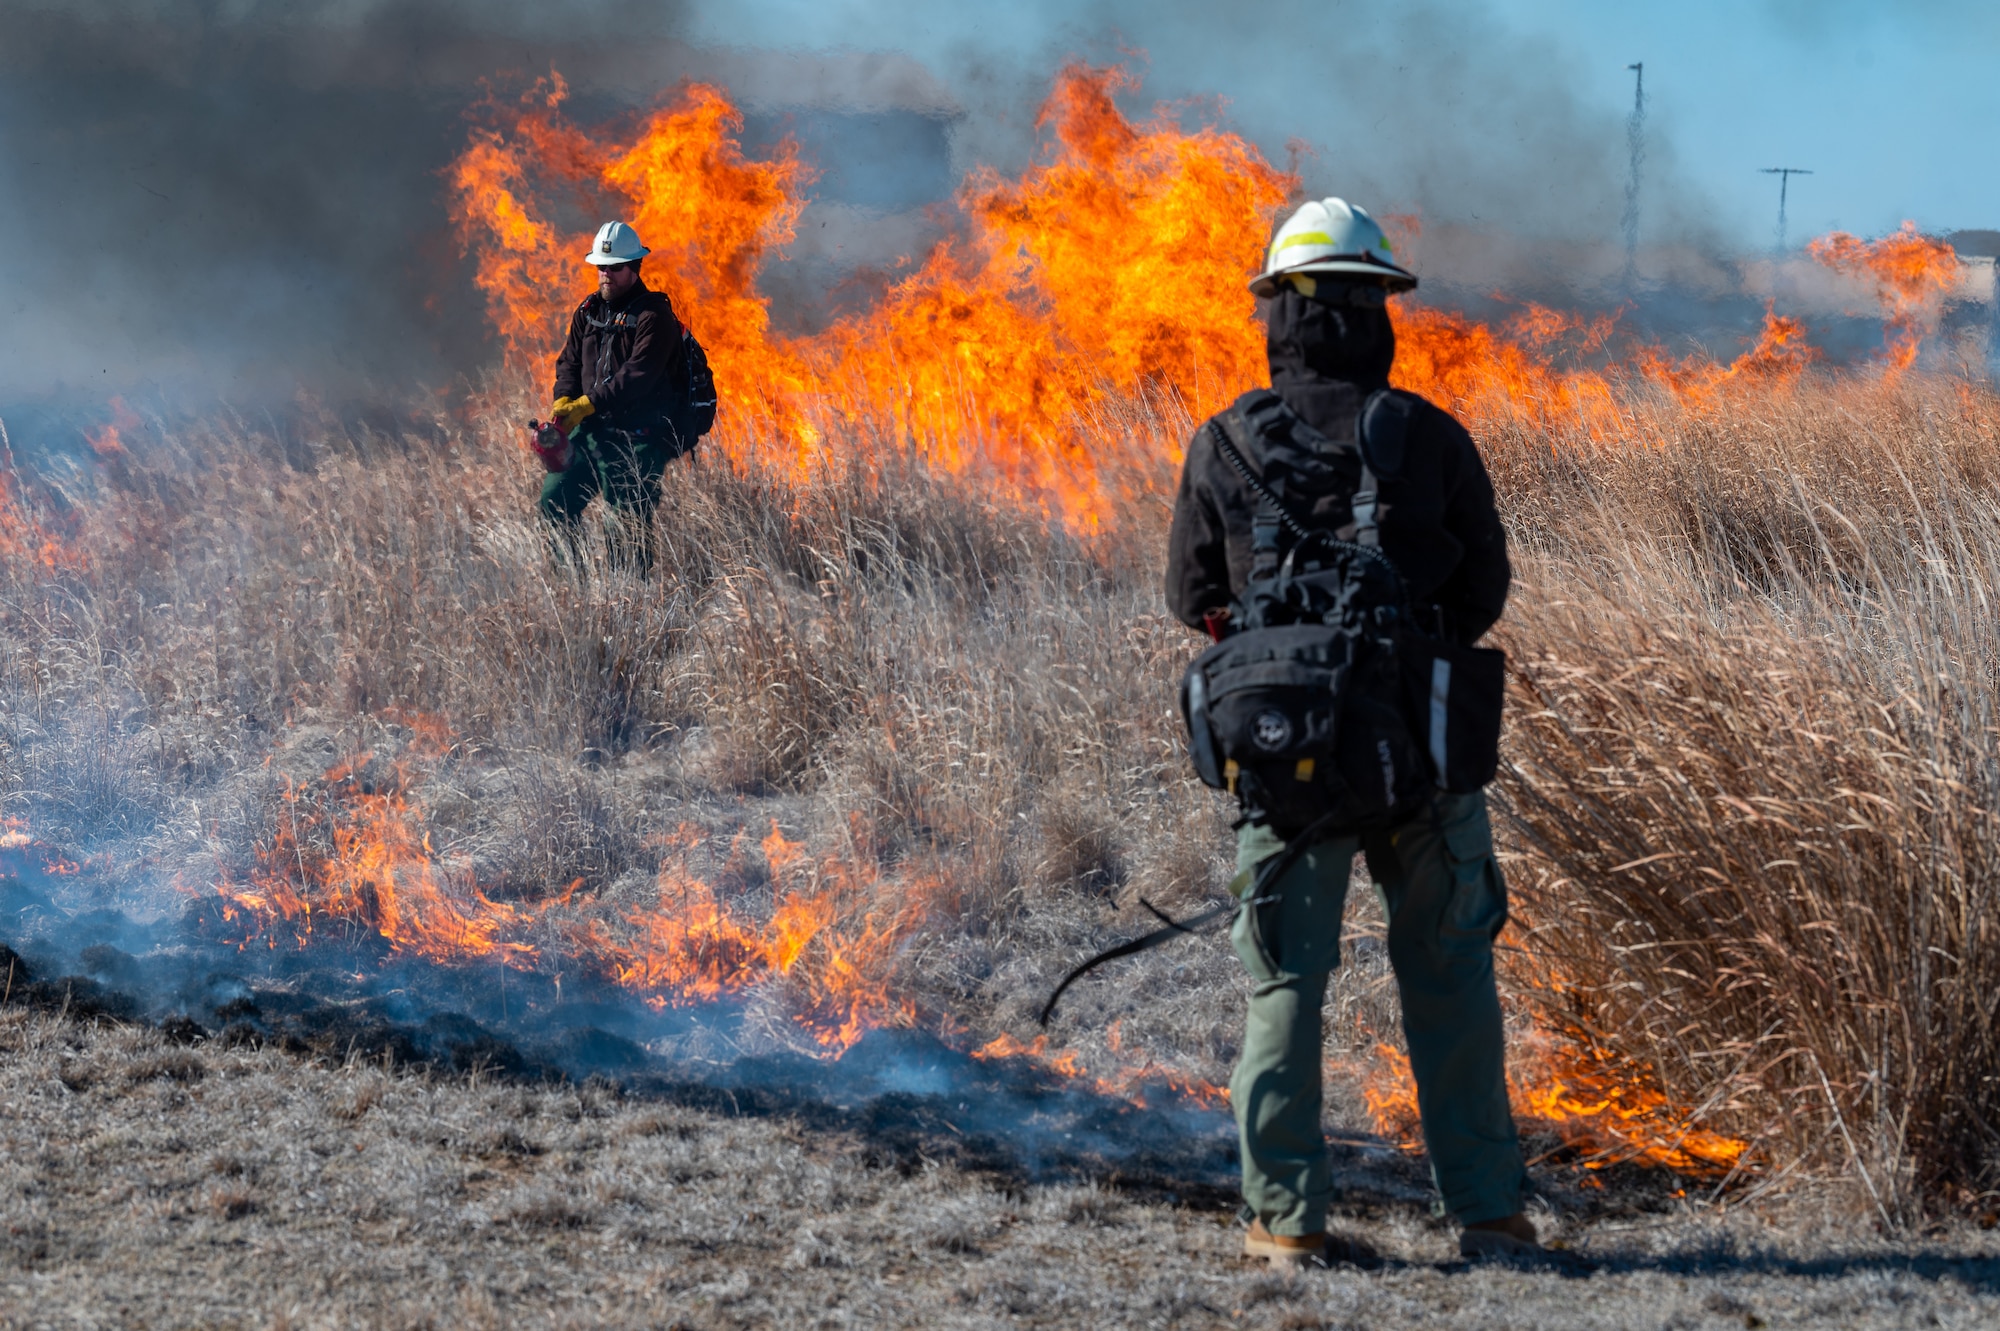 The 22nd Civil Engineer Squadron conducts a prescribed fire, also known as a controlled burn, at the Restoration Prairie on McConnell Air Force Base, Kansas, March 18, 2023. Controlled burns are conducted routinely and designed to remove the threat of potential larger uncontrolled fires. (U.S. Air Force photo by Airman 1st Class Brenden Beezley)